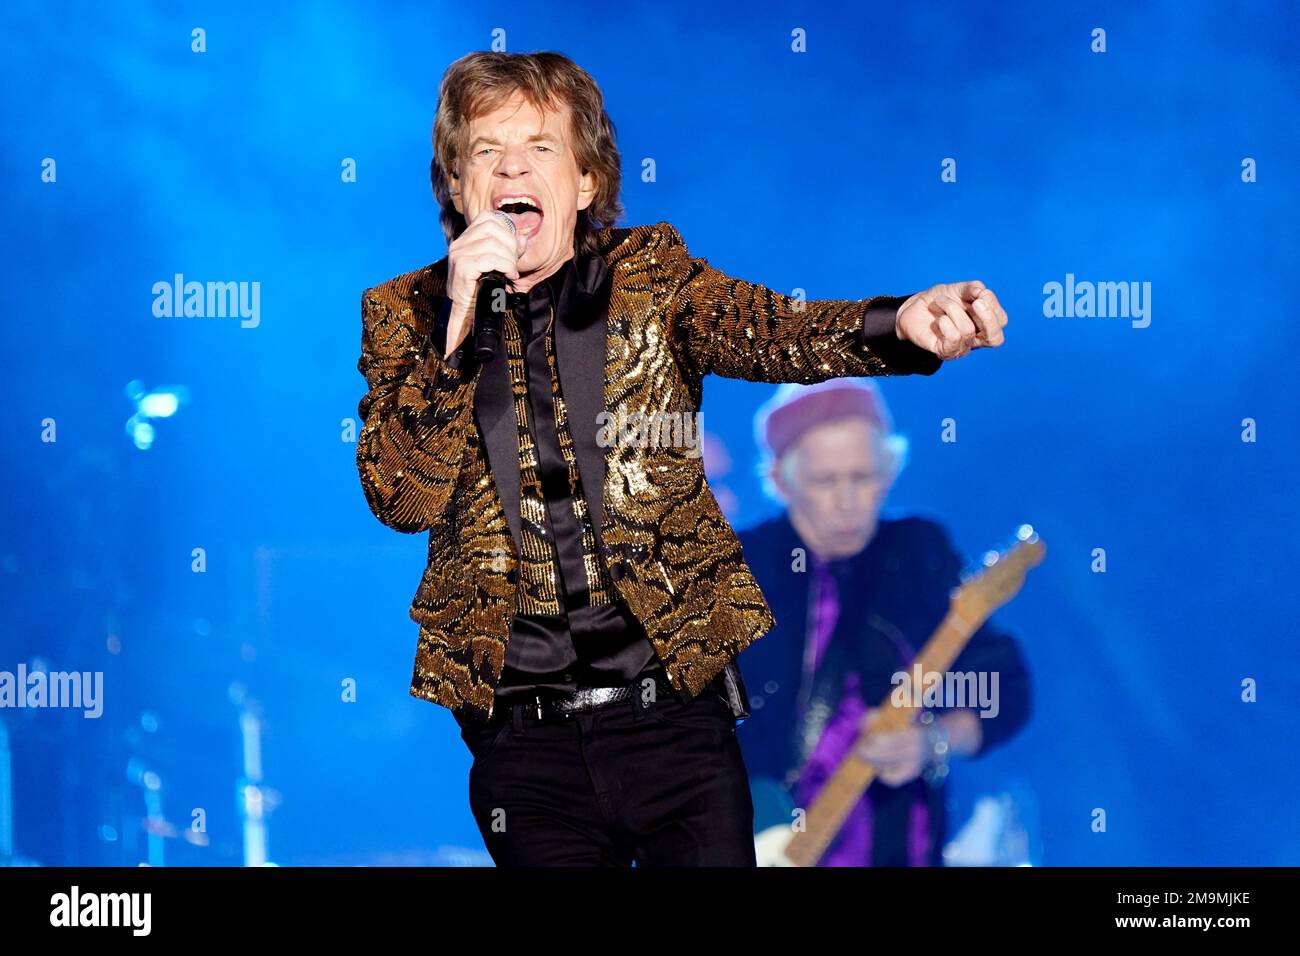 FILE - Mick Jagger, of the Rolling Stones, performs during the band's "No  Filter" tour on Monday, Nov. 15, 2021, at Ford Field in Detroit. The  Rolling Stones plan to release what